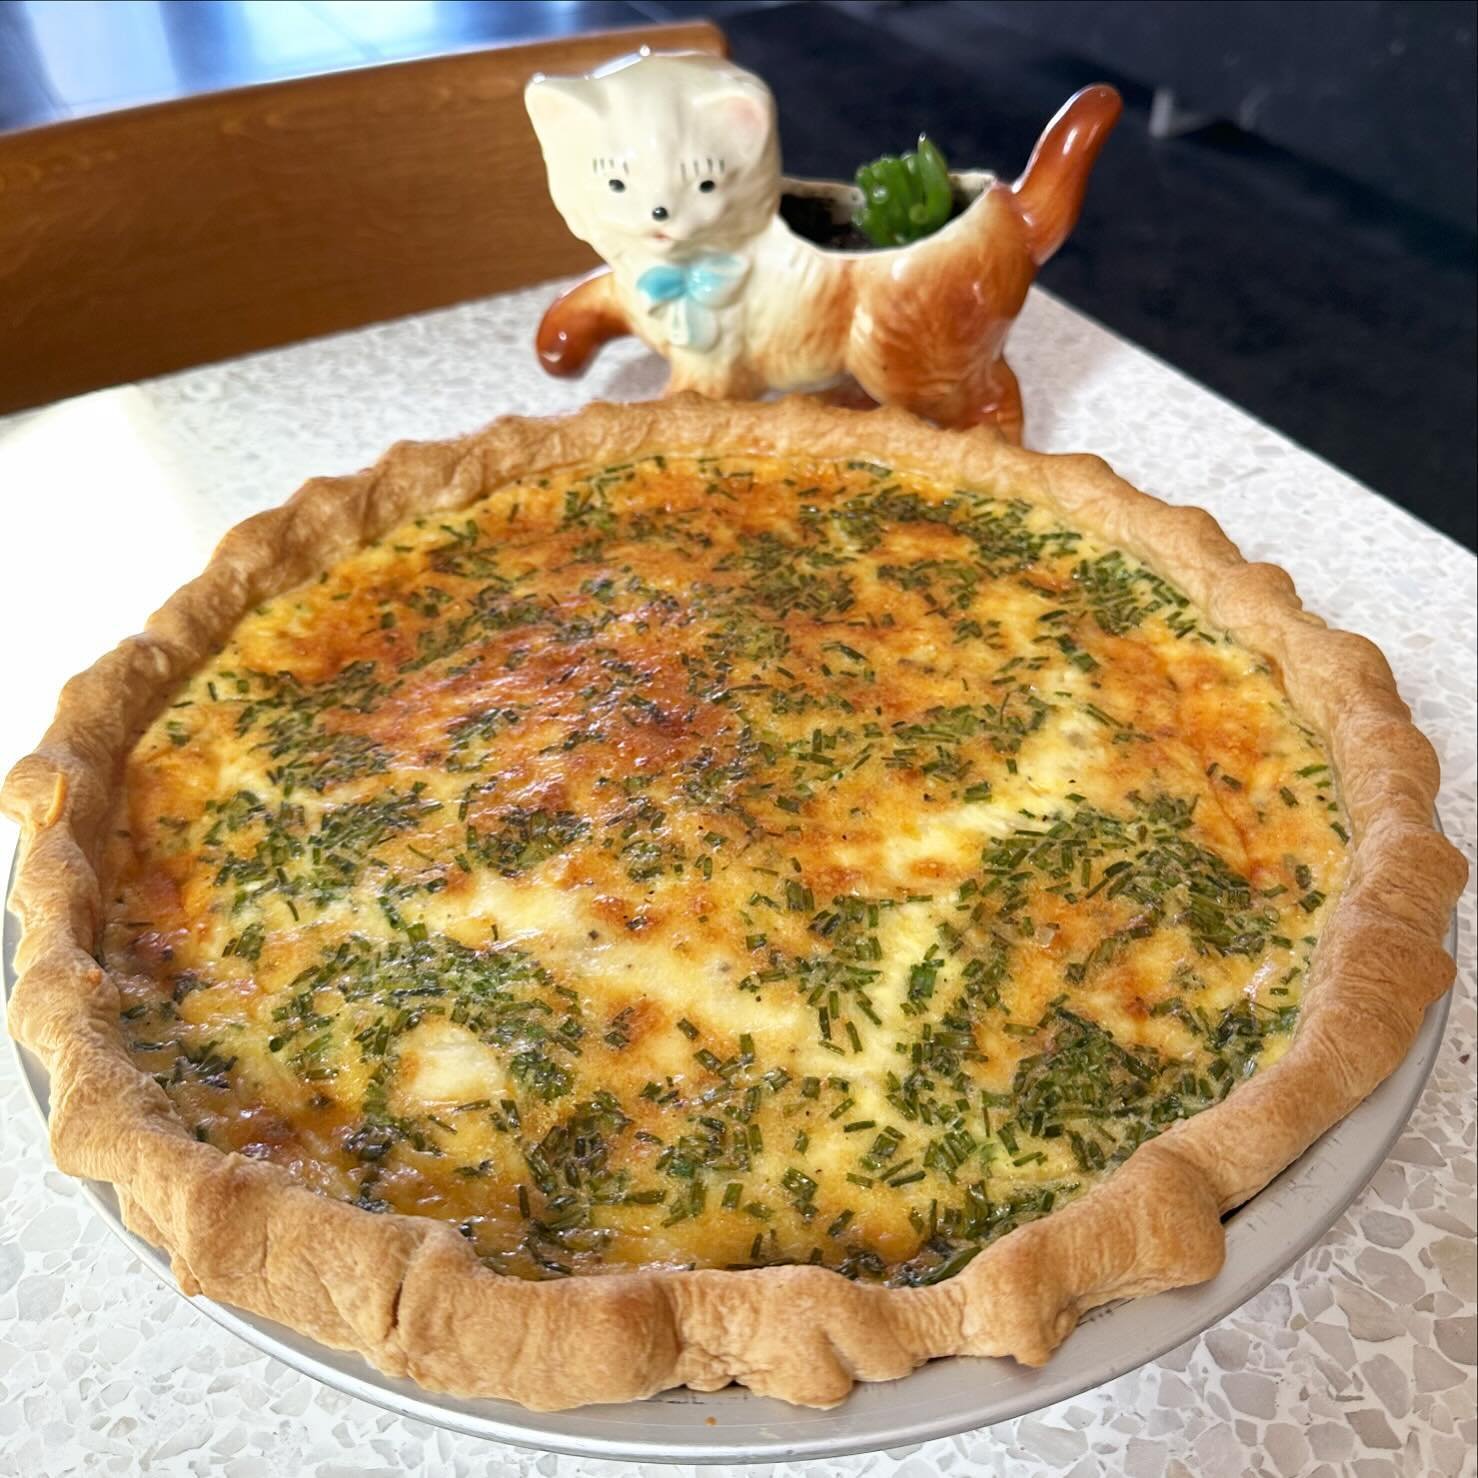 Quiche of the day is leek with chives and cheddar. 🥧We&rsquo;ve opened up our outdoor dining space so come enjoy the beautiful day with us! #buckminsterscatcafe #lunchwithcats #quicheoftheday